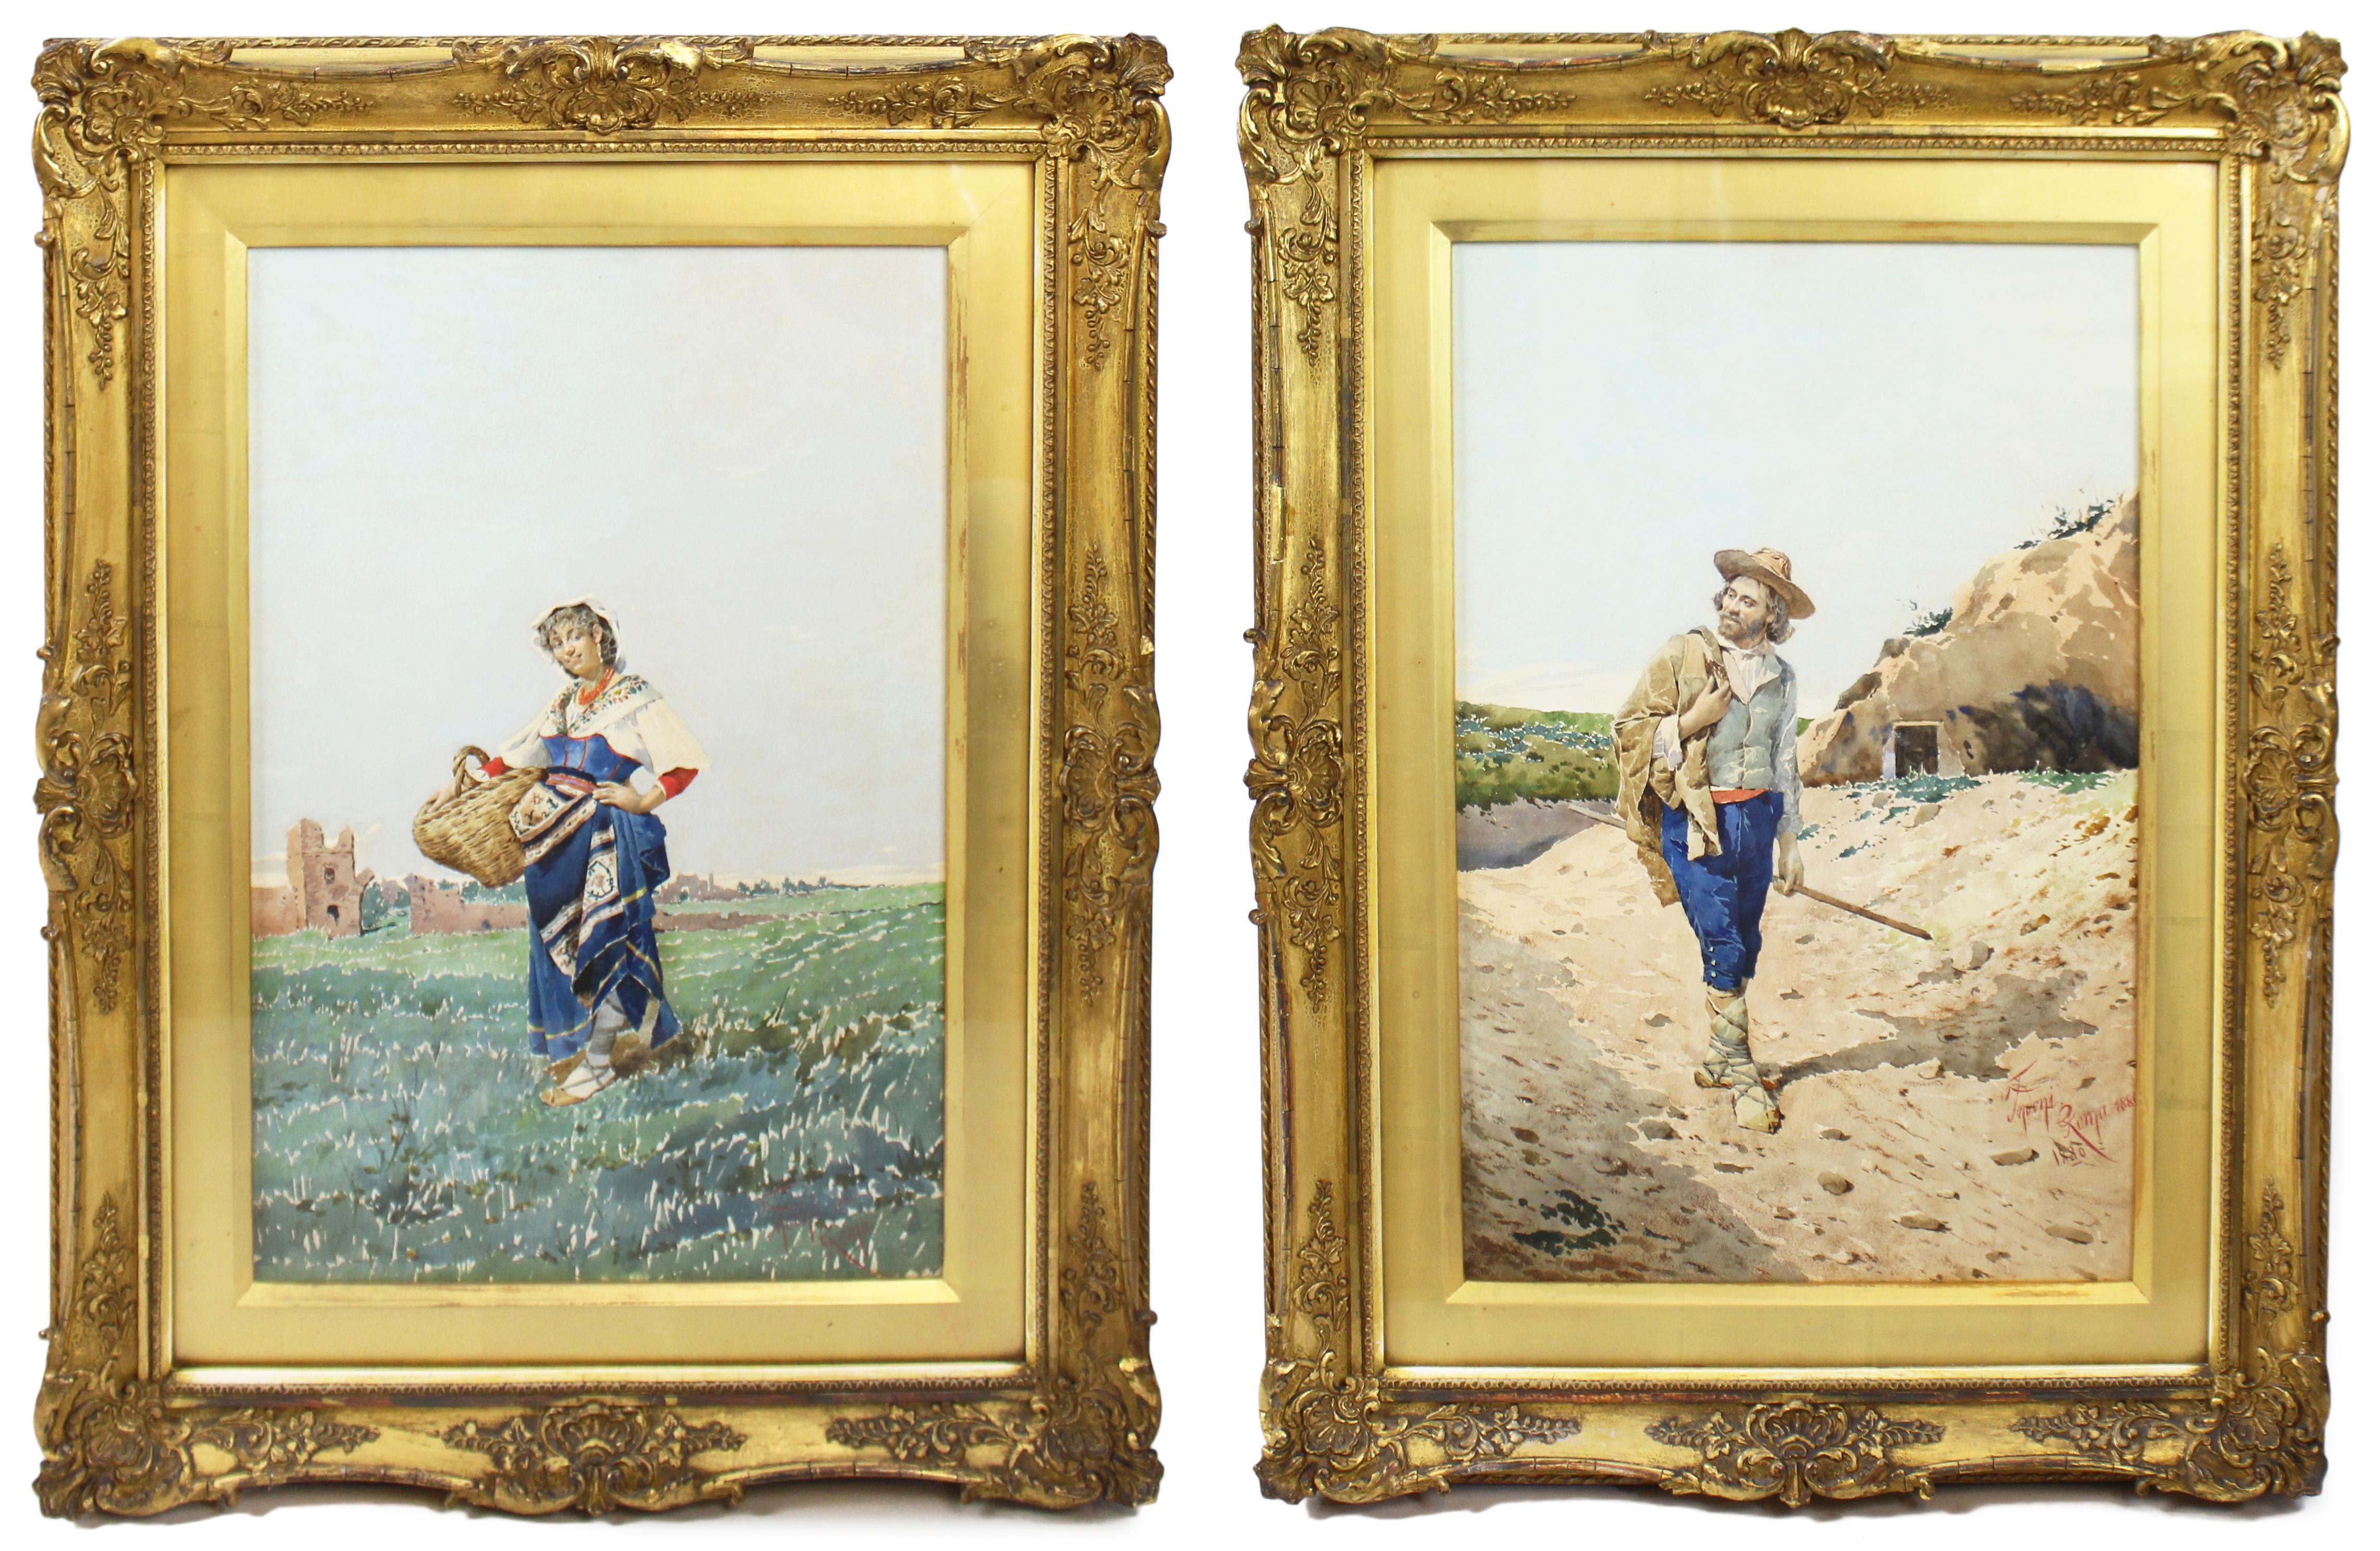 Pair of watercolours by Filippo Indoni (Italian, 1842–1908)


Period Italian, 19th century, dated 1880

Artist Filippo Indoni (Italian, 1842–1908)
     

Medium Watercolour on paper mounted on cardboard

Size Both frames measure 46 x 62 cm